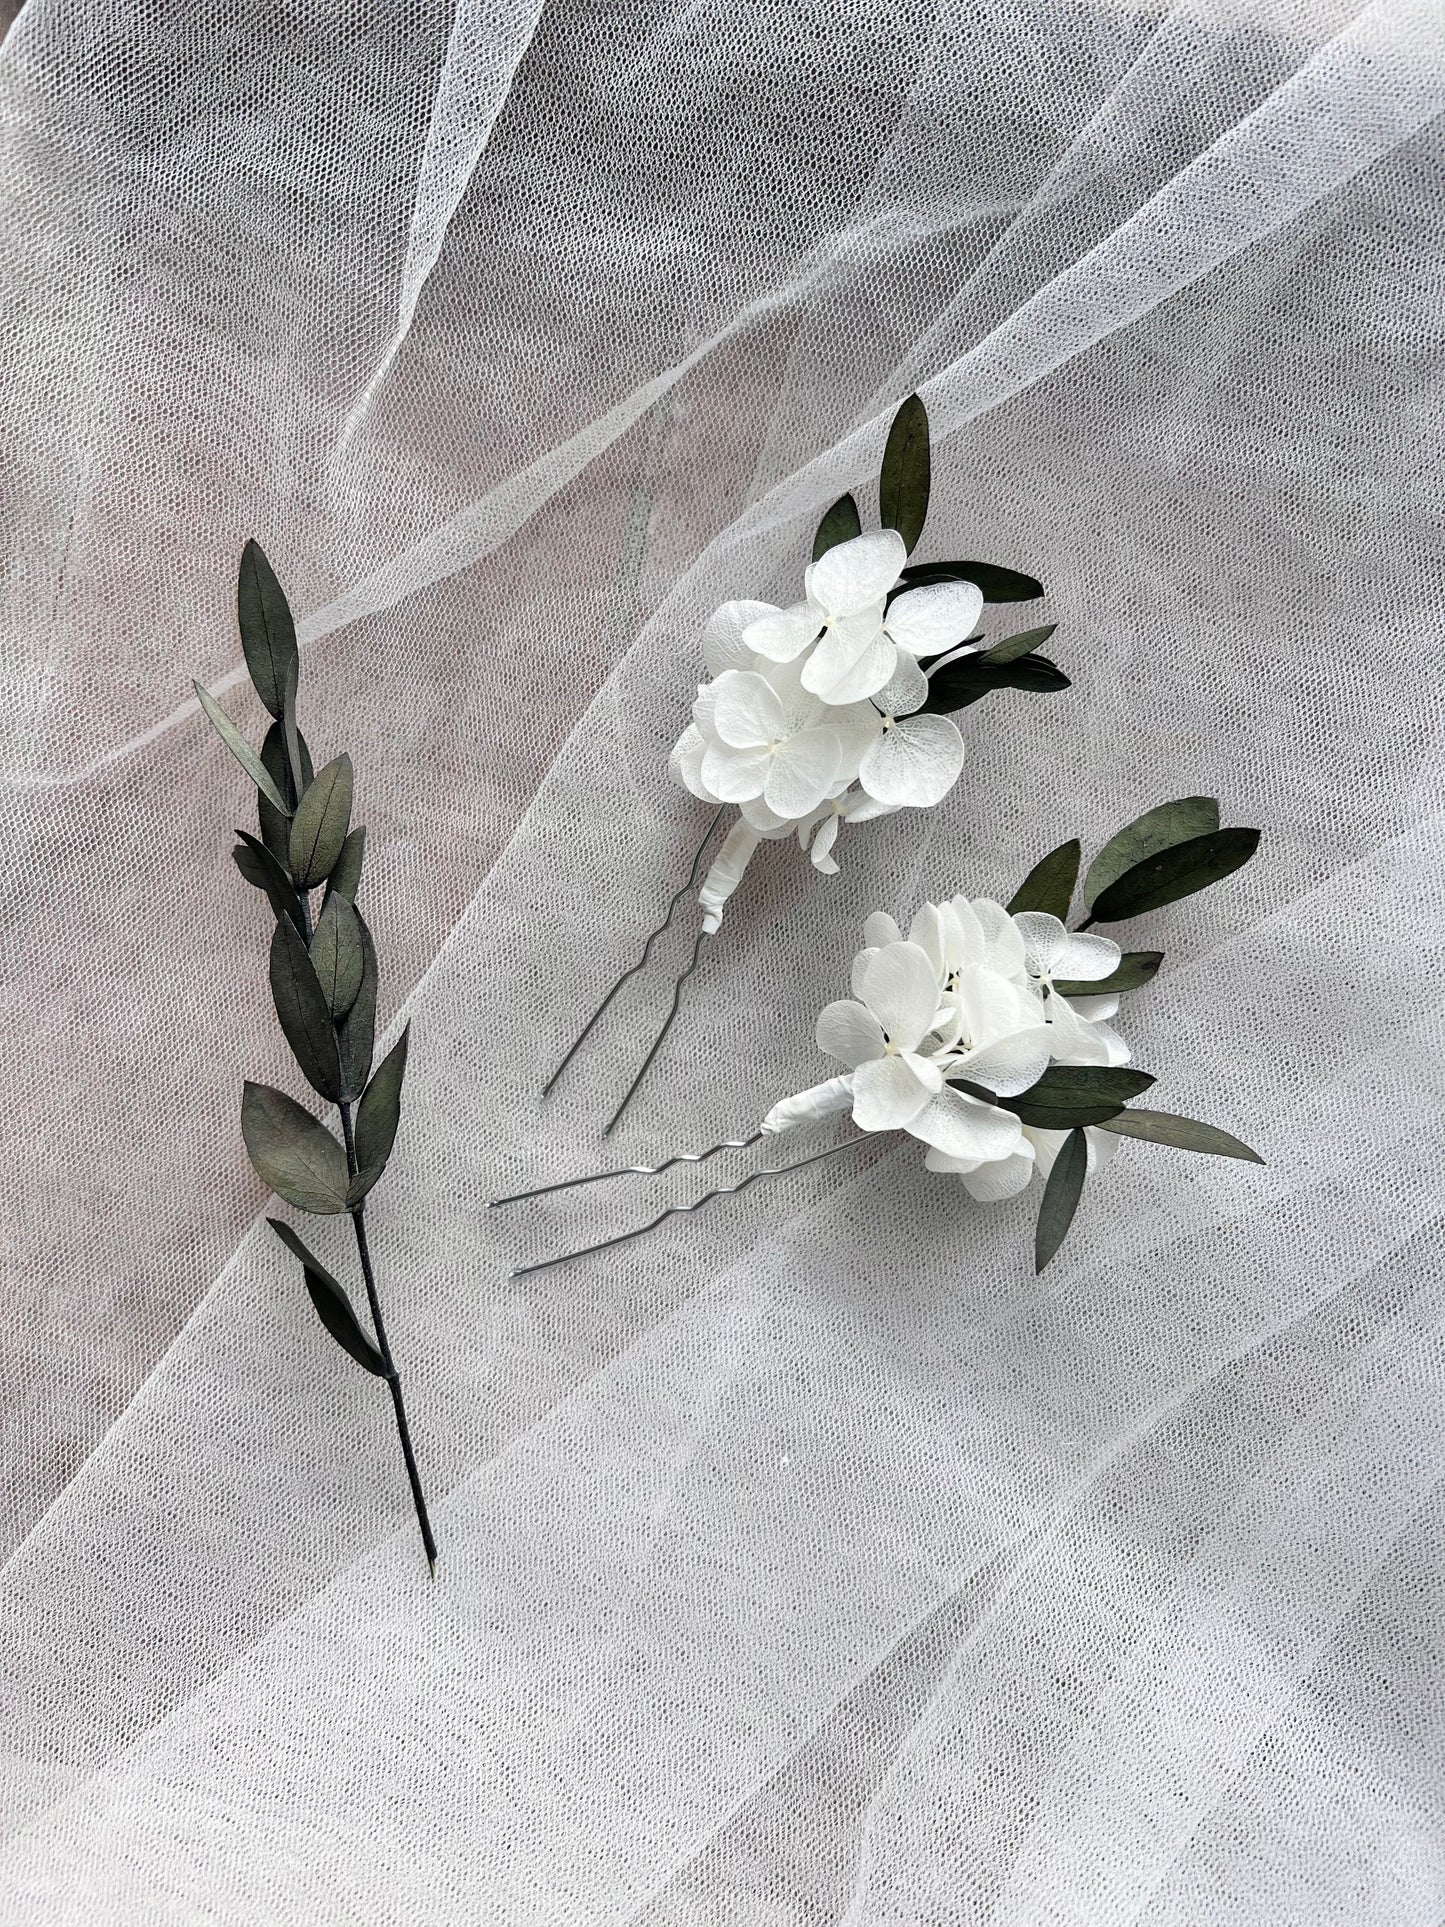 White and Green Dried Flower Hair Pins, Minimal Classic Bride Hair Accessories Hydrangea Eucalyptus Leaves, Floral Hair Piece for Wedding